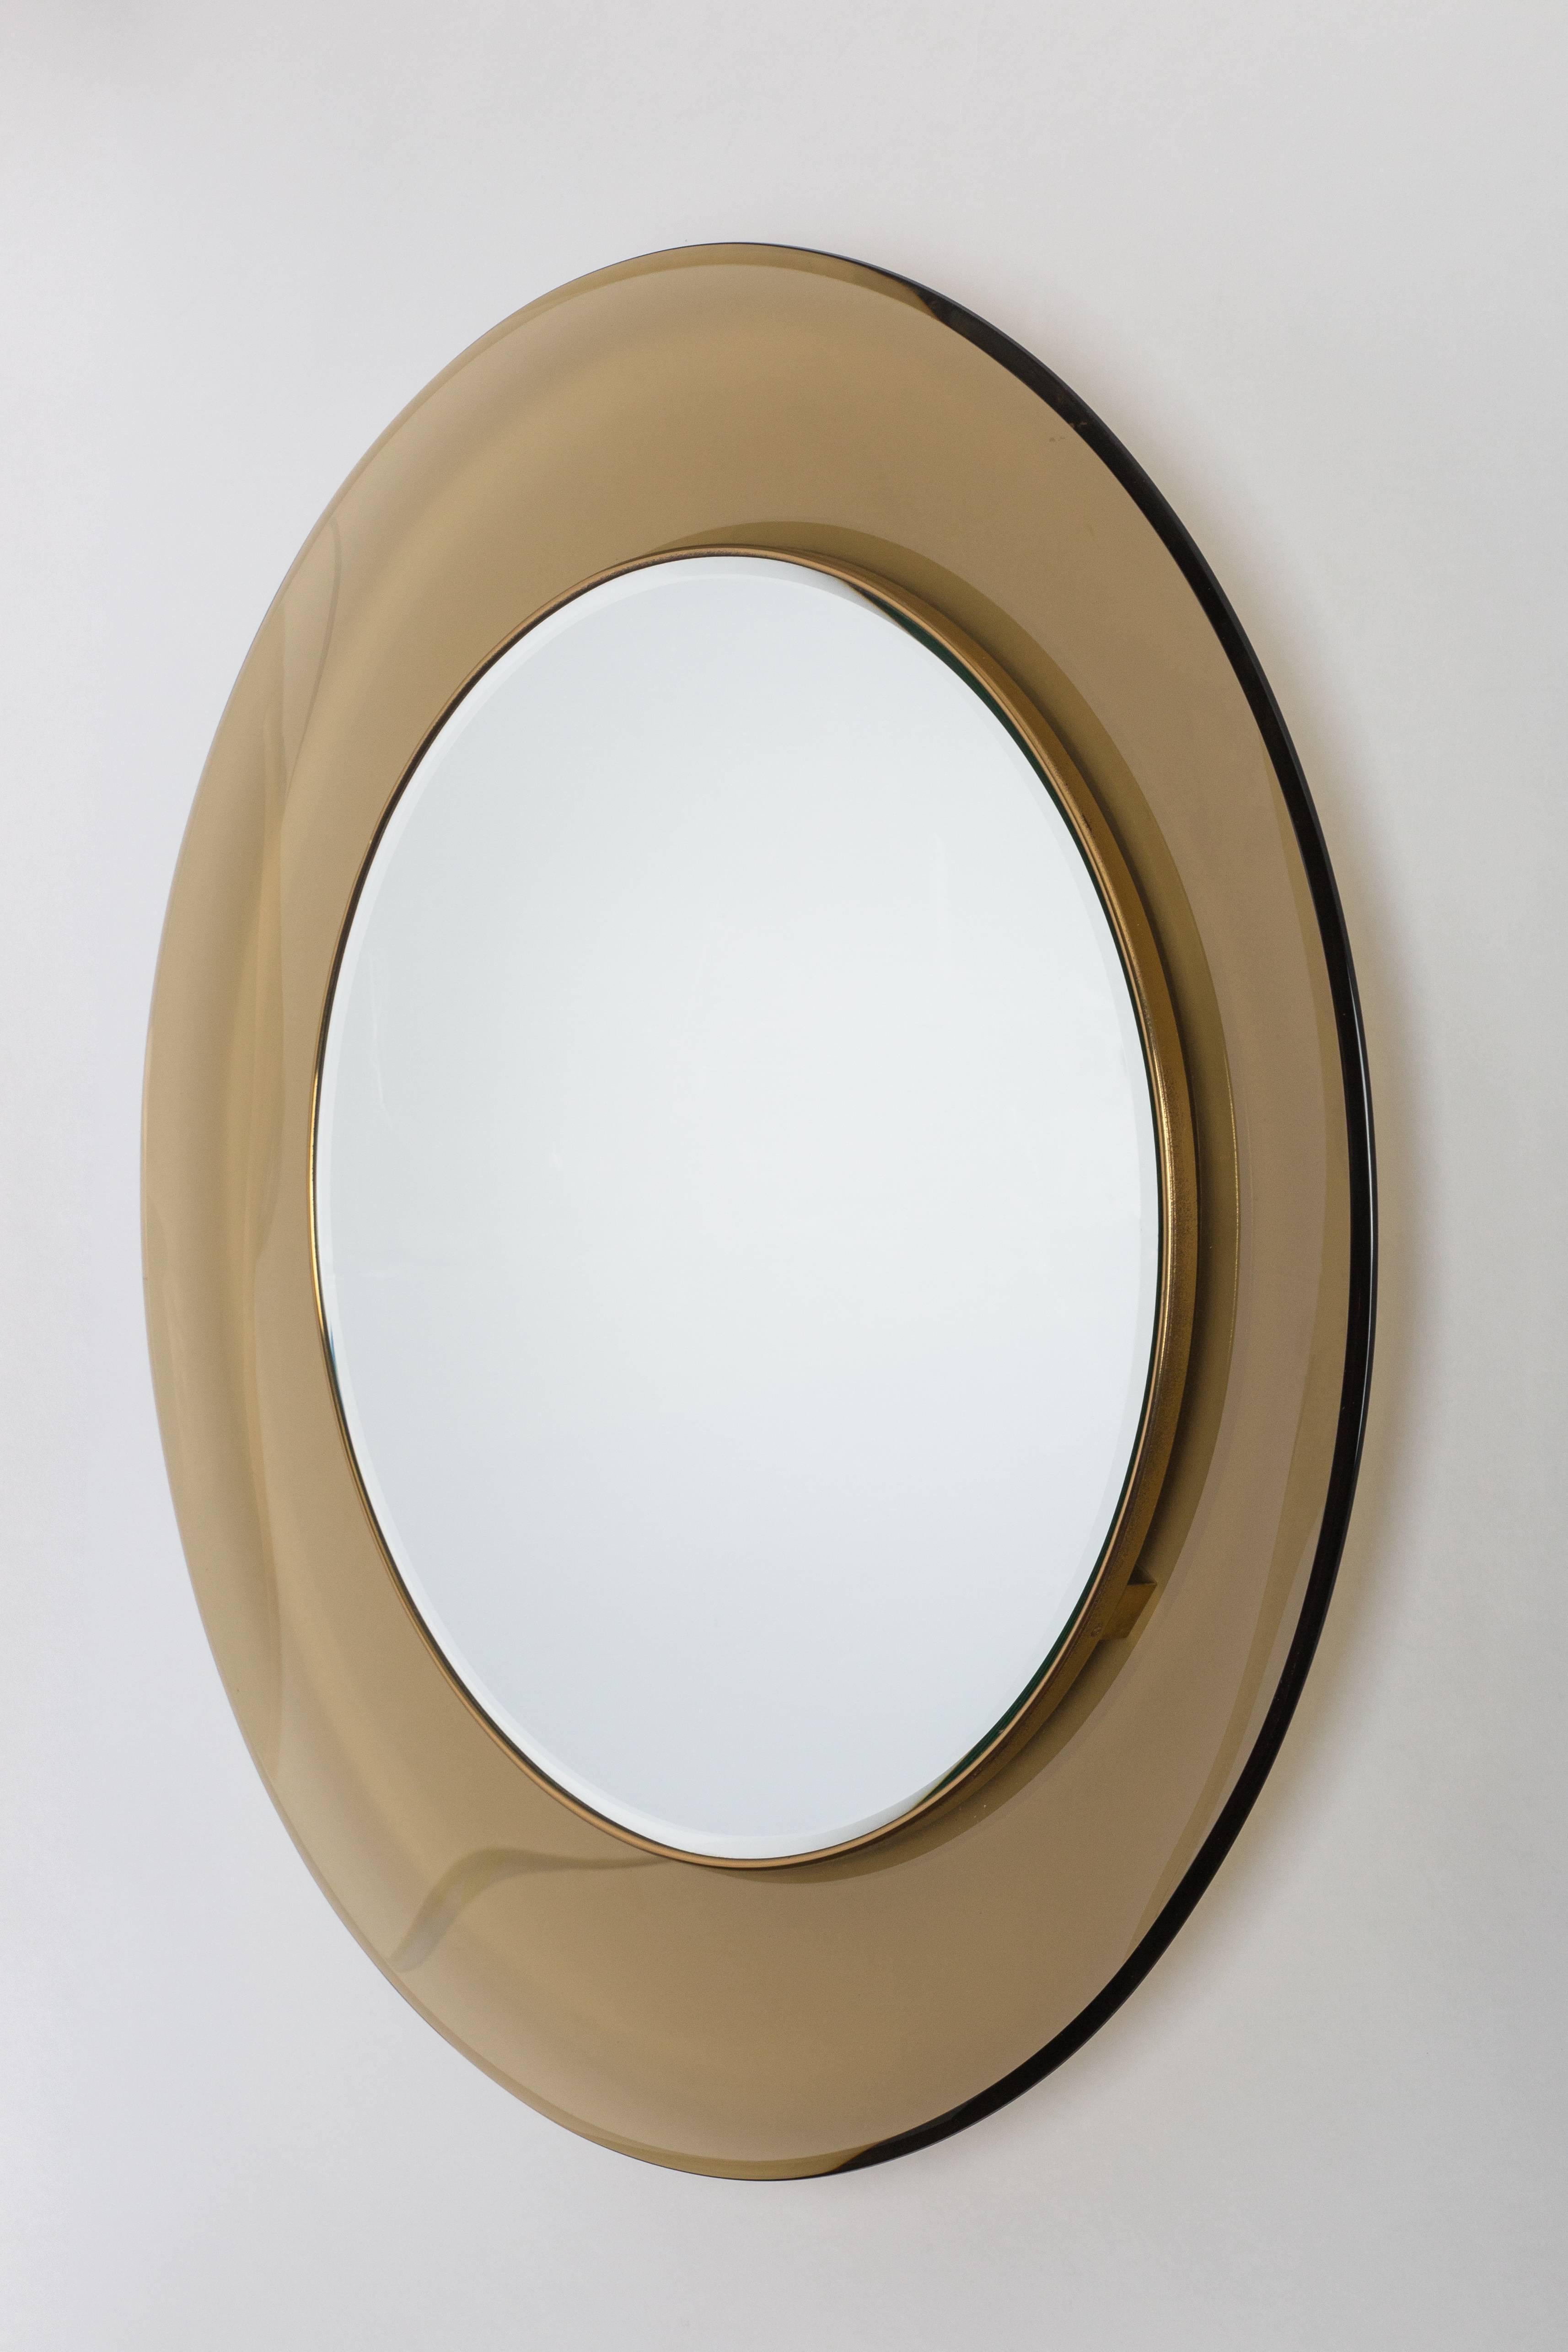 Max Ingrand for Fontana Arte classic and elegant matched pair of amber colored, curved and beveled glass framing mirrored glass encased in brass trim.  
Original Fontana Arte mirrors each dated on the back '1963' and '1965.'

Sold individually or as